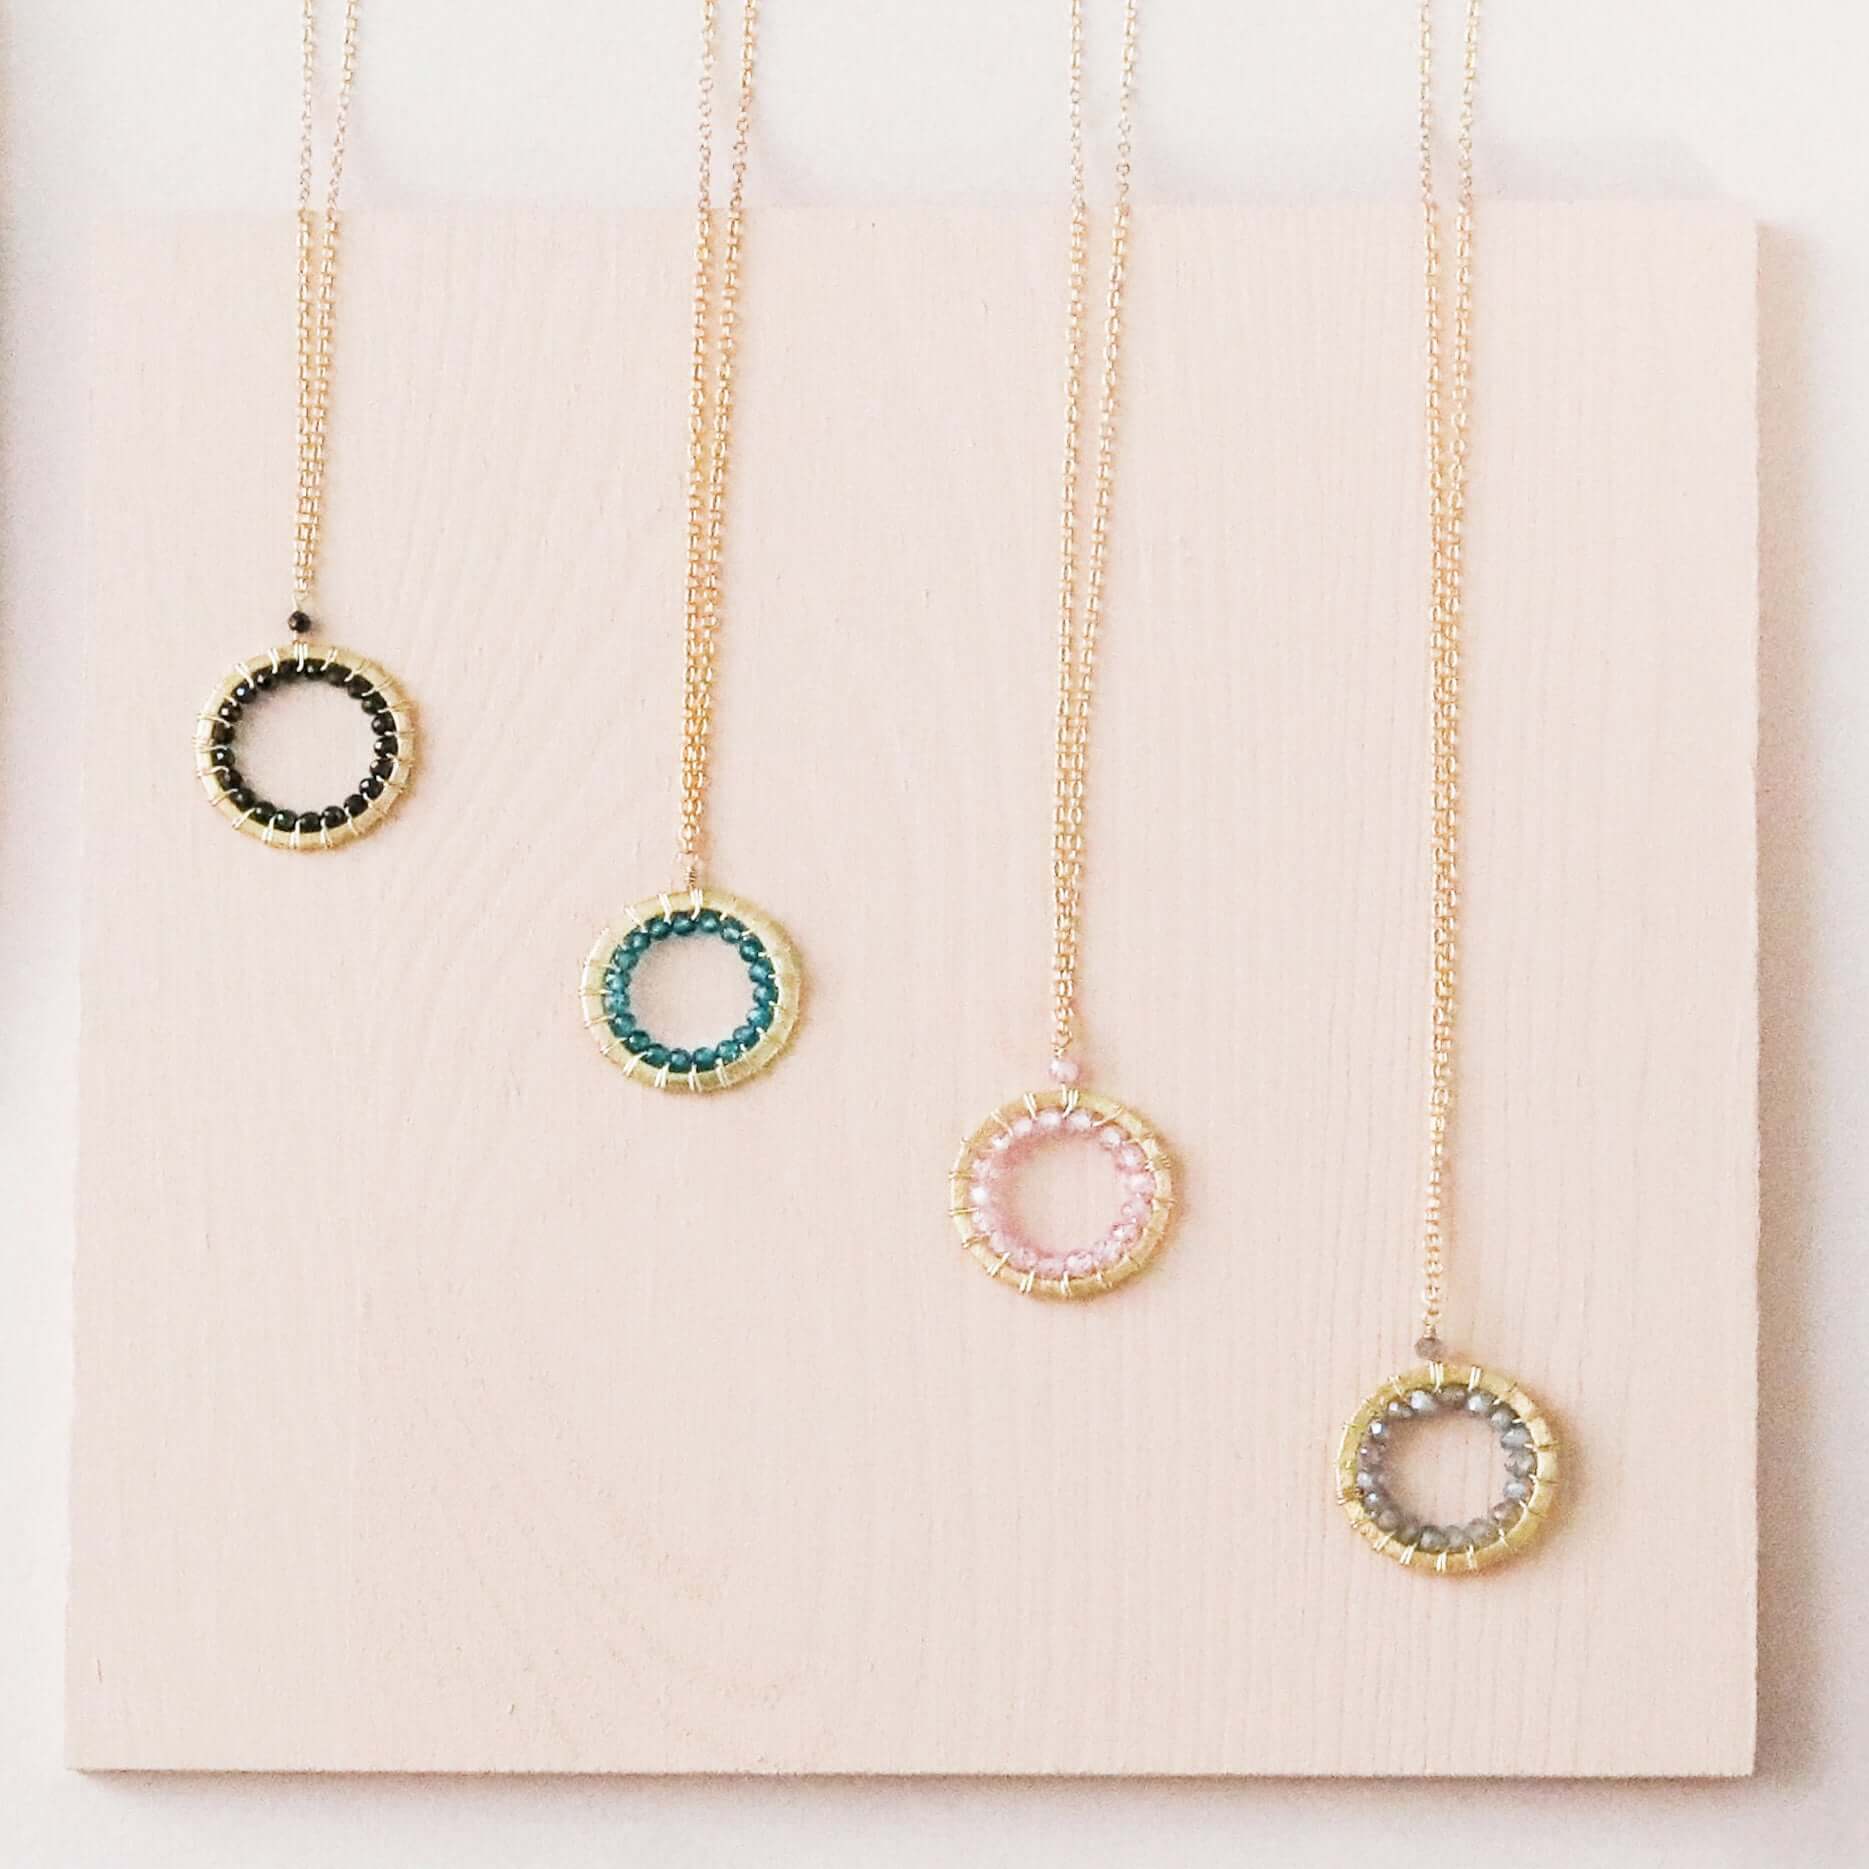 Mini Gemstone Circle Necklace in Shimmering Colorful Gemstones